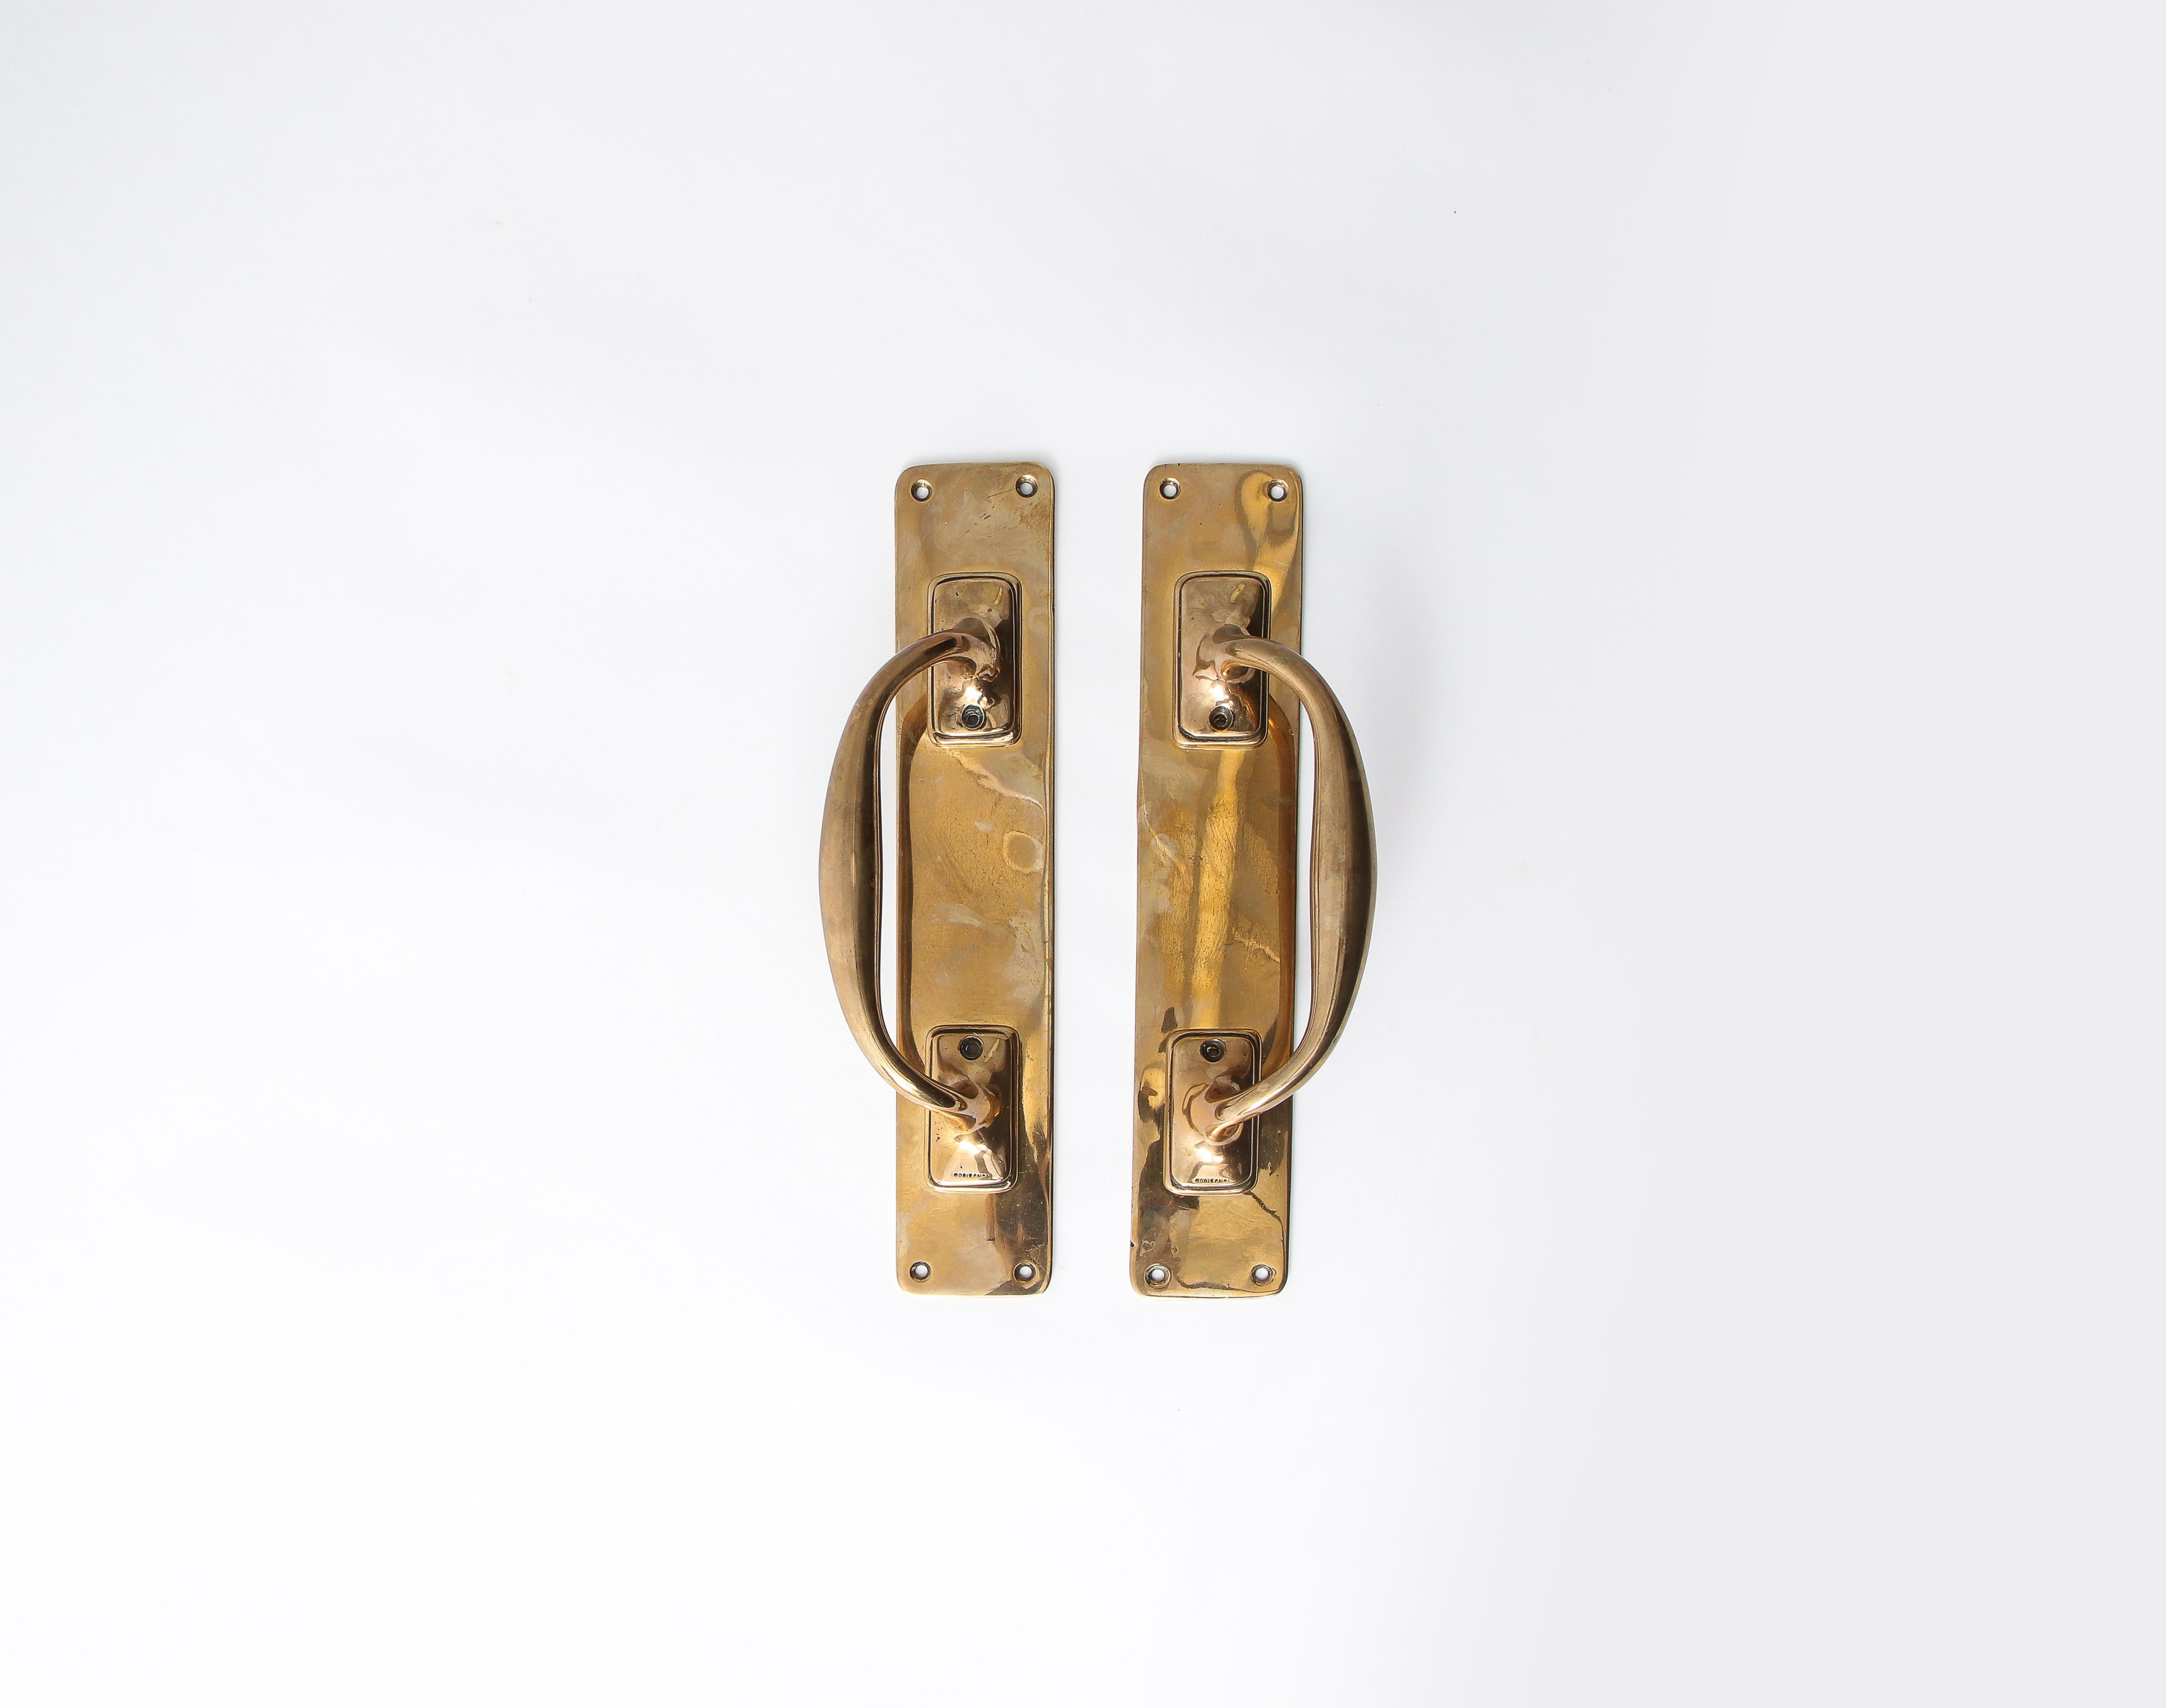 Set of two polished bronze vintage door handles on larger rectangular plaques. Lovely well-worn patina. The handles are each fitted with four holes in each of the corners for nails.